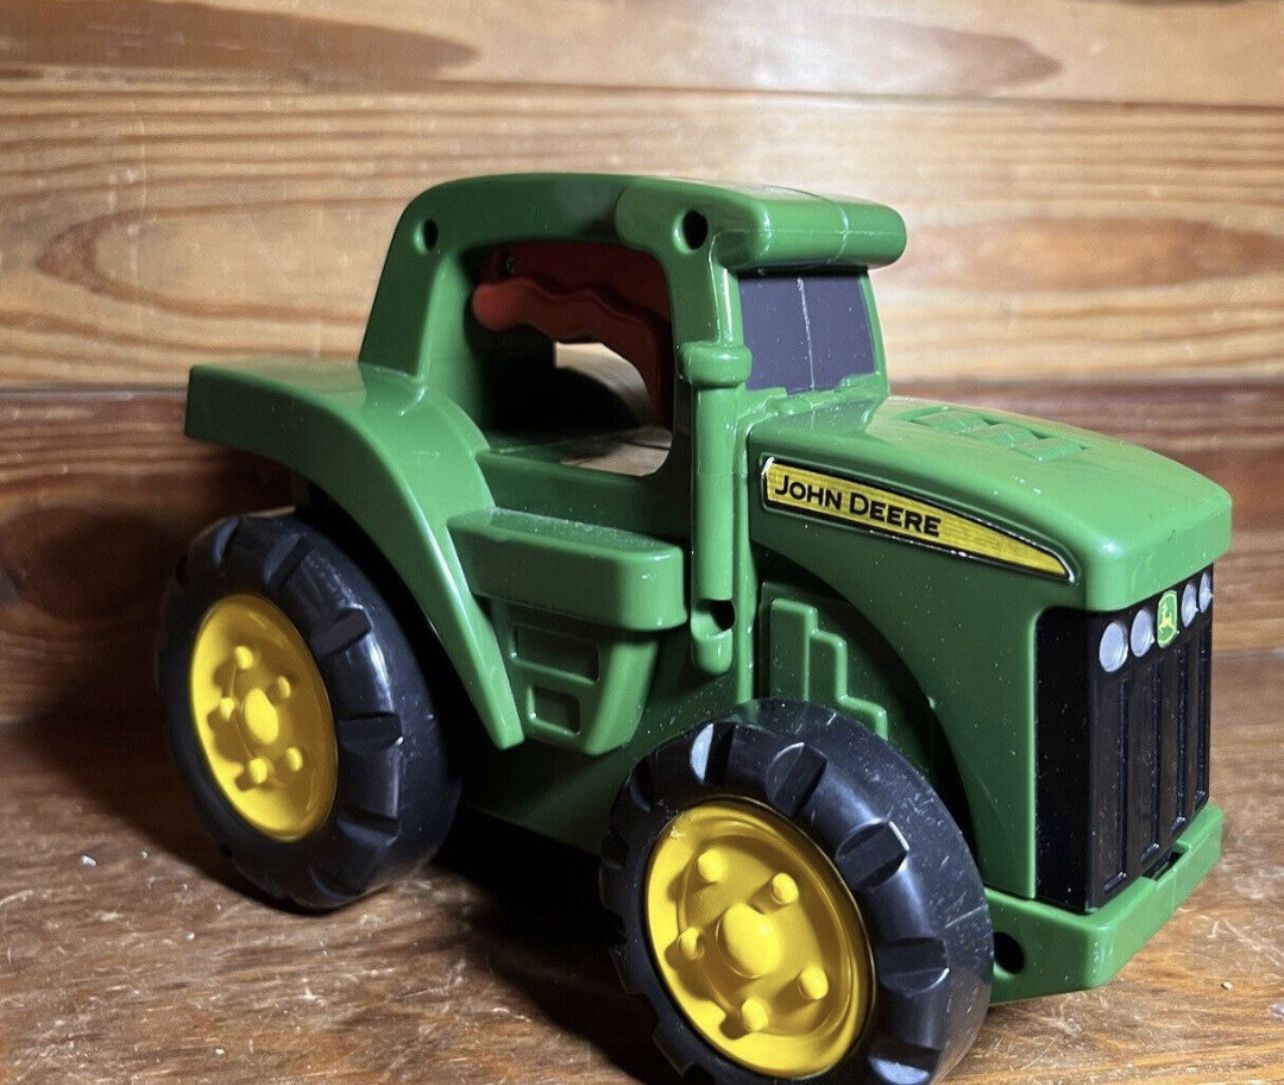 John Deere Roll & Go Tractor Rolling Wheels Flashlight with Engine Sounds Light